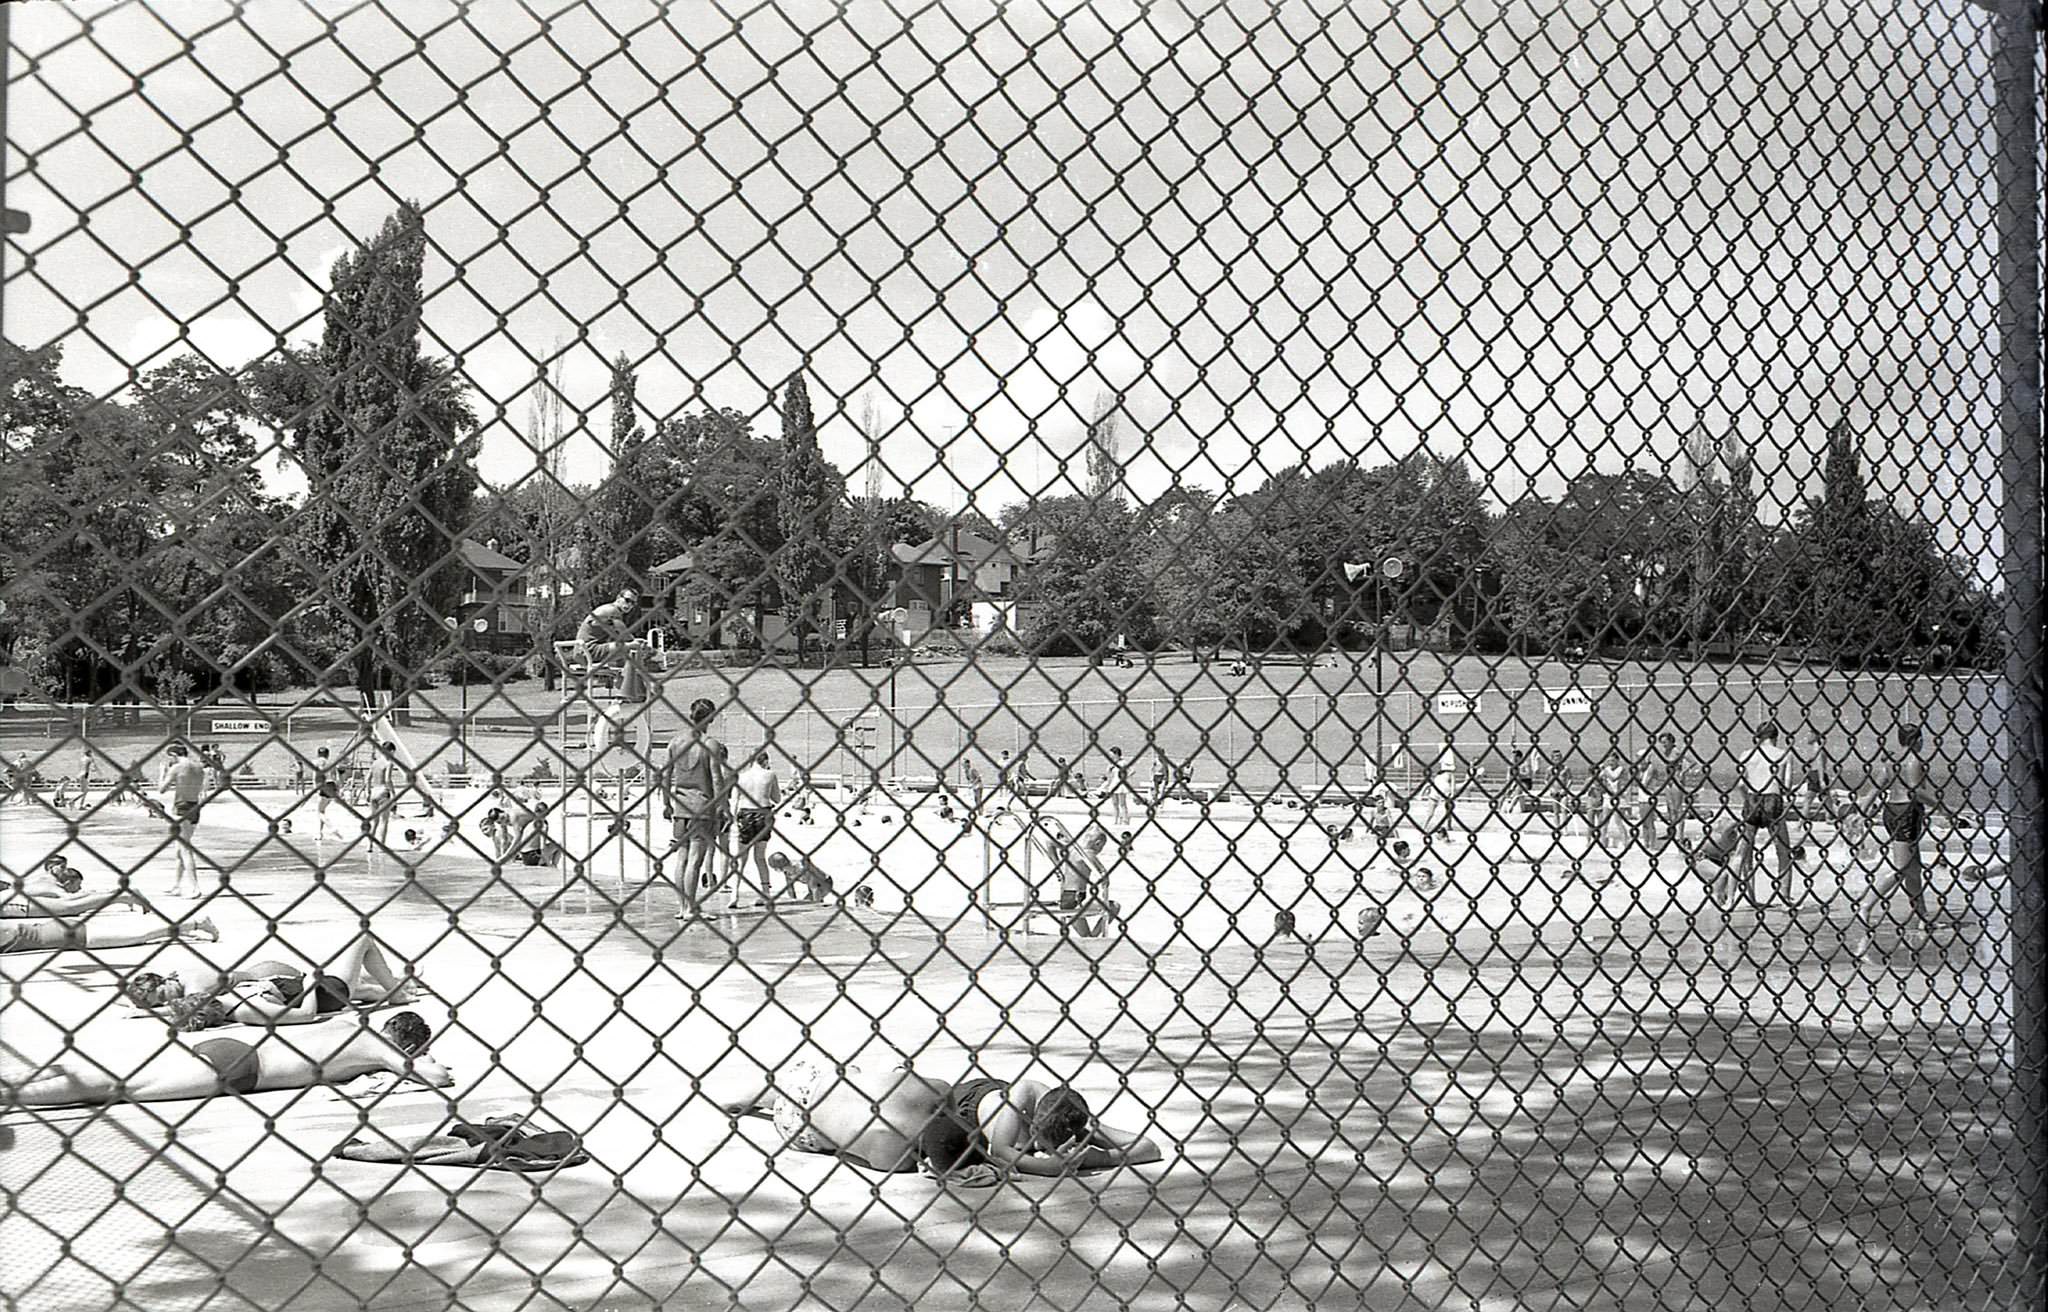 The pool at Eglinton Park, 1960s. This view looking northwest, across the pool, towards the backs of houses on the east side of Oriole Parkway (north of Eglinton).